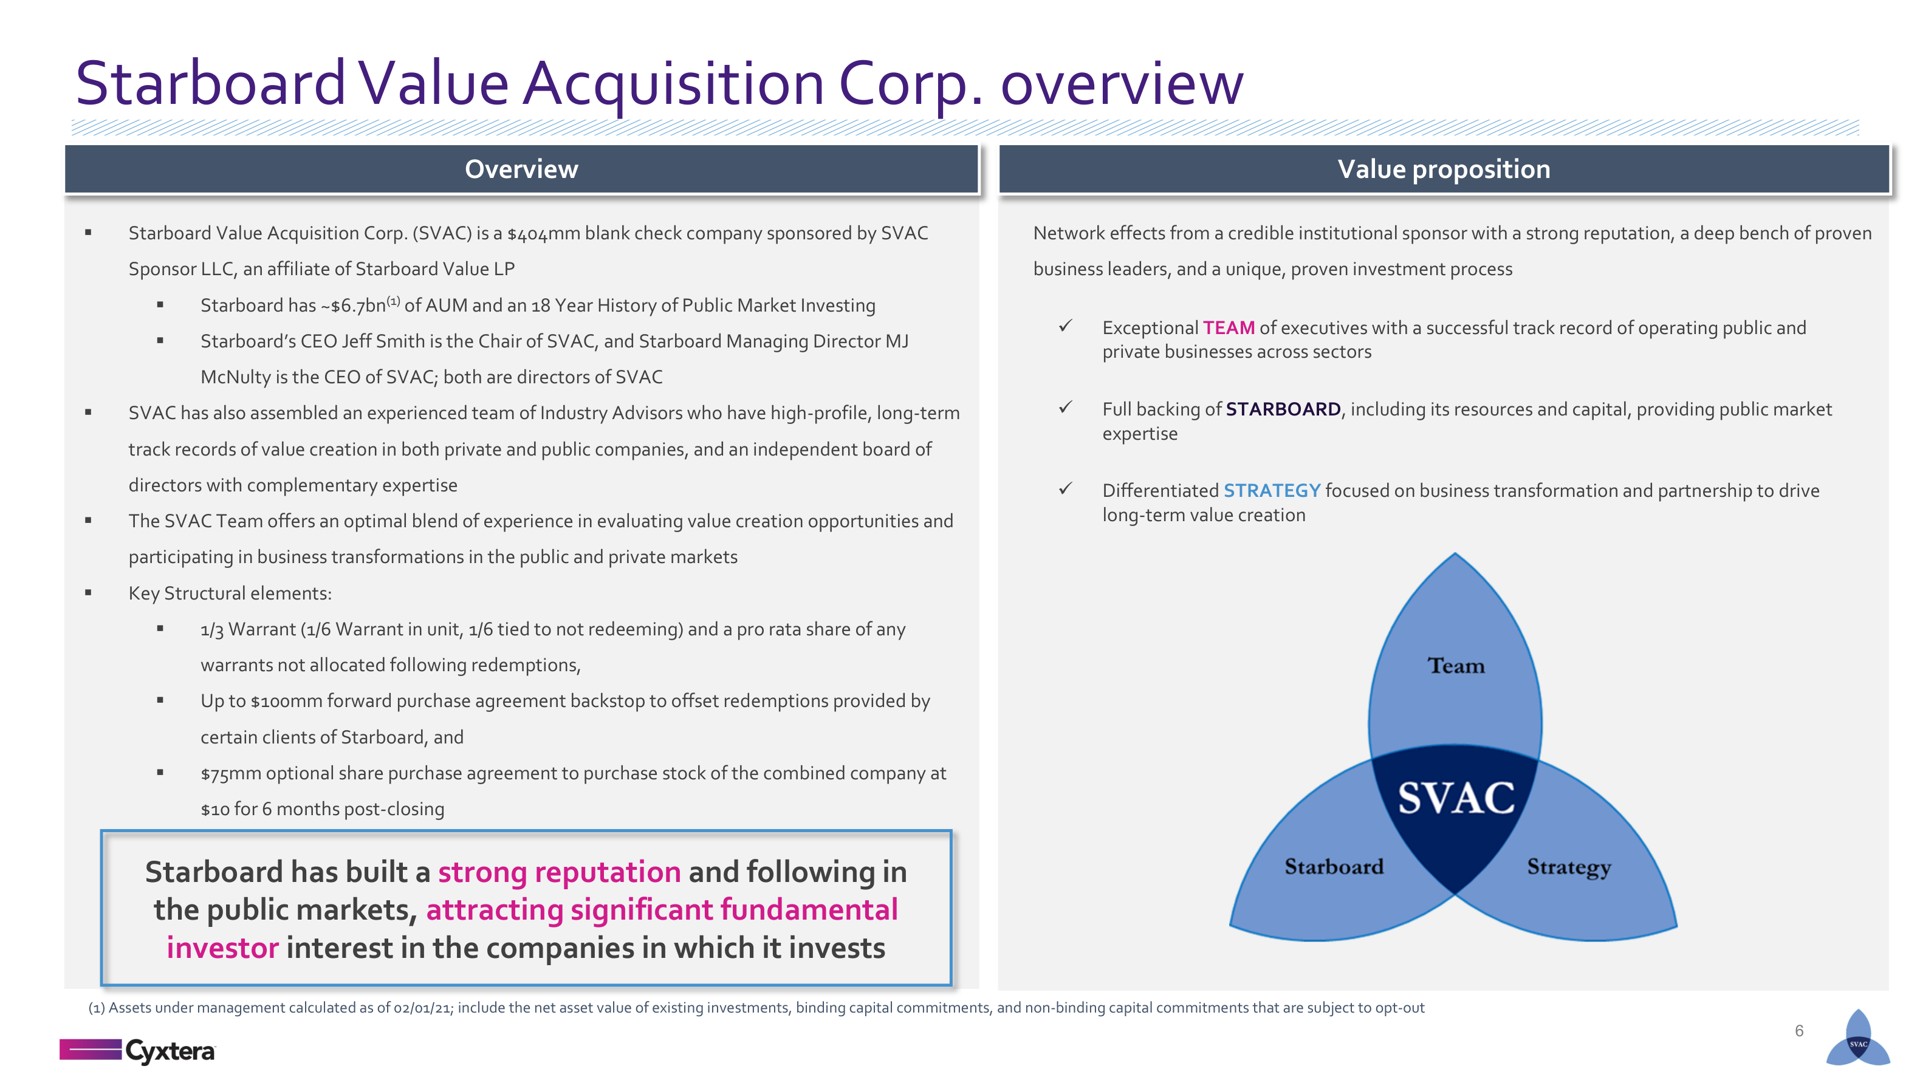 starboard value acquisition corp overview | Cyxtera